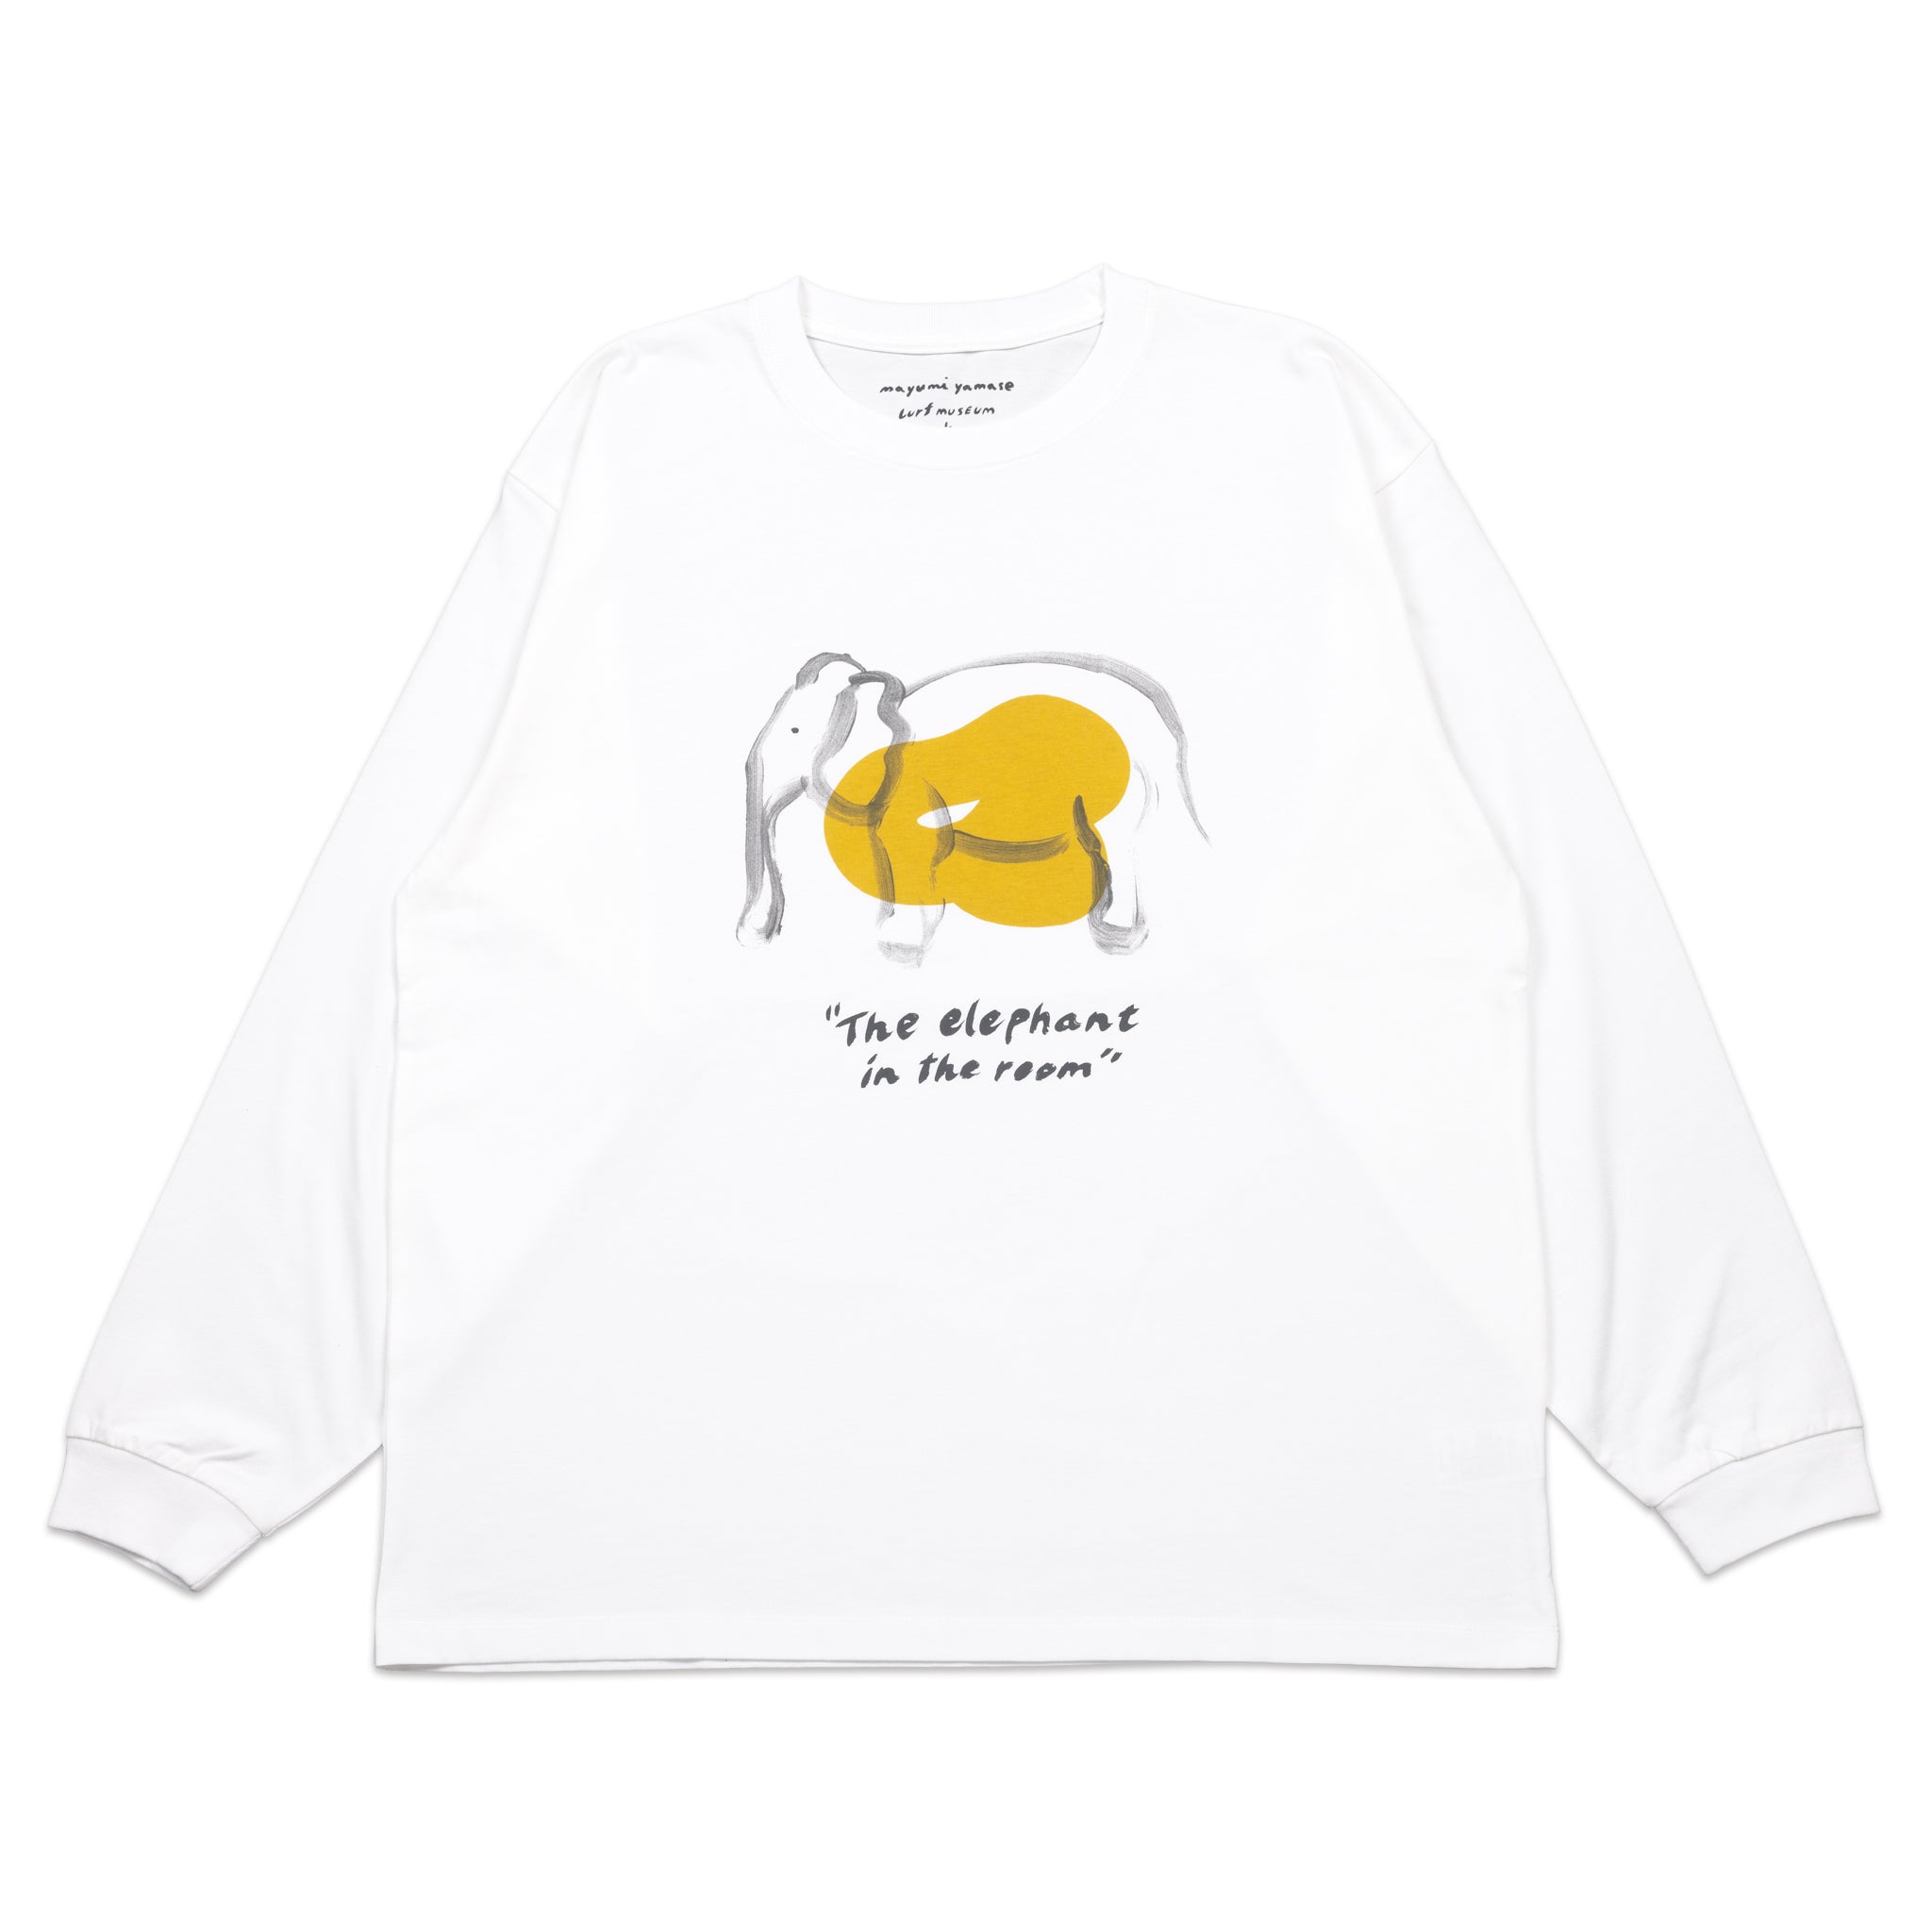 The elephant in the room 長袖Tシャツ